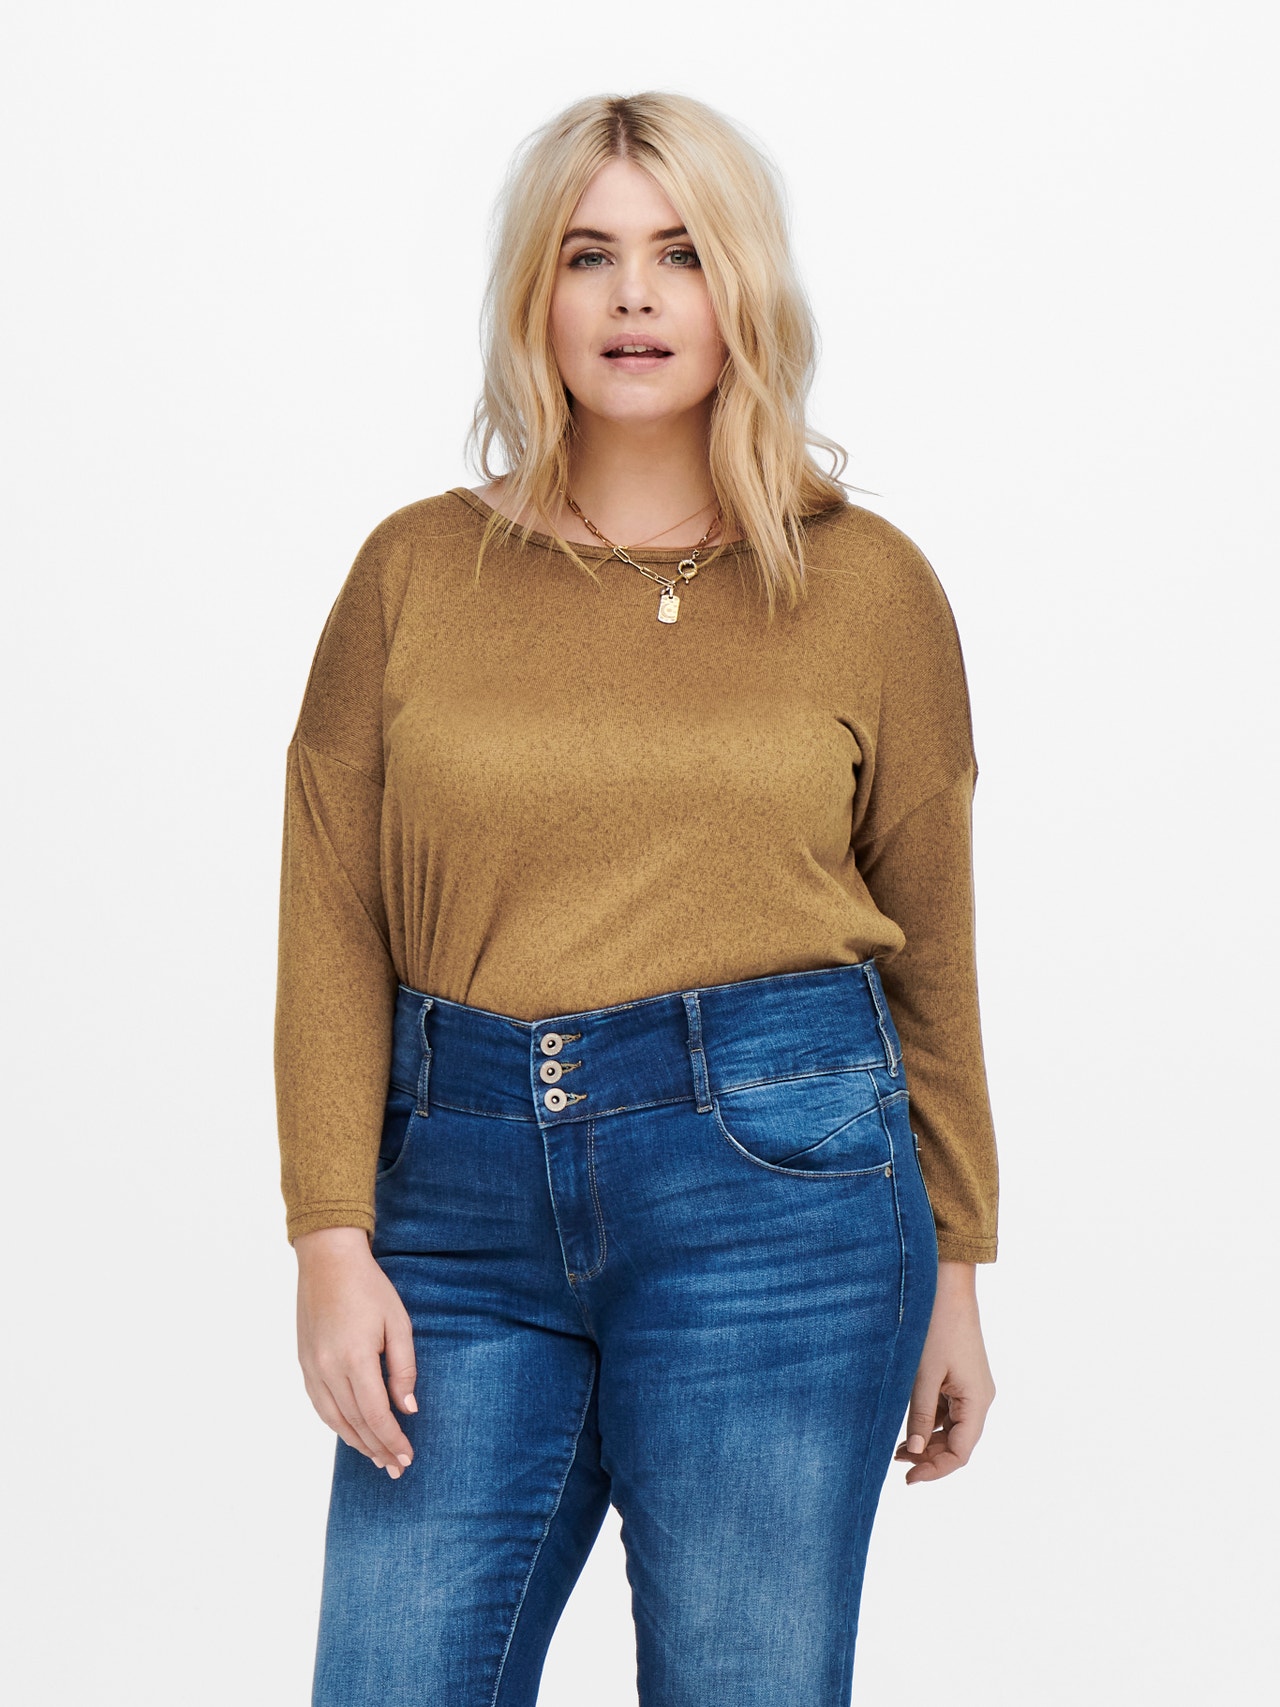 ONLY Curvy solid colored Top -Toasted Coconut - 15246678